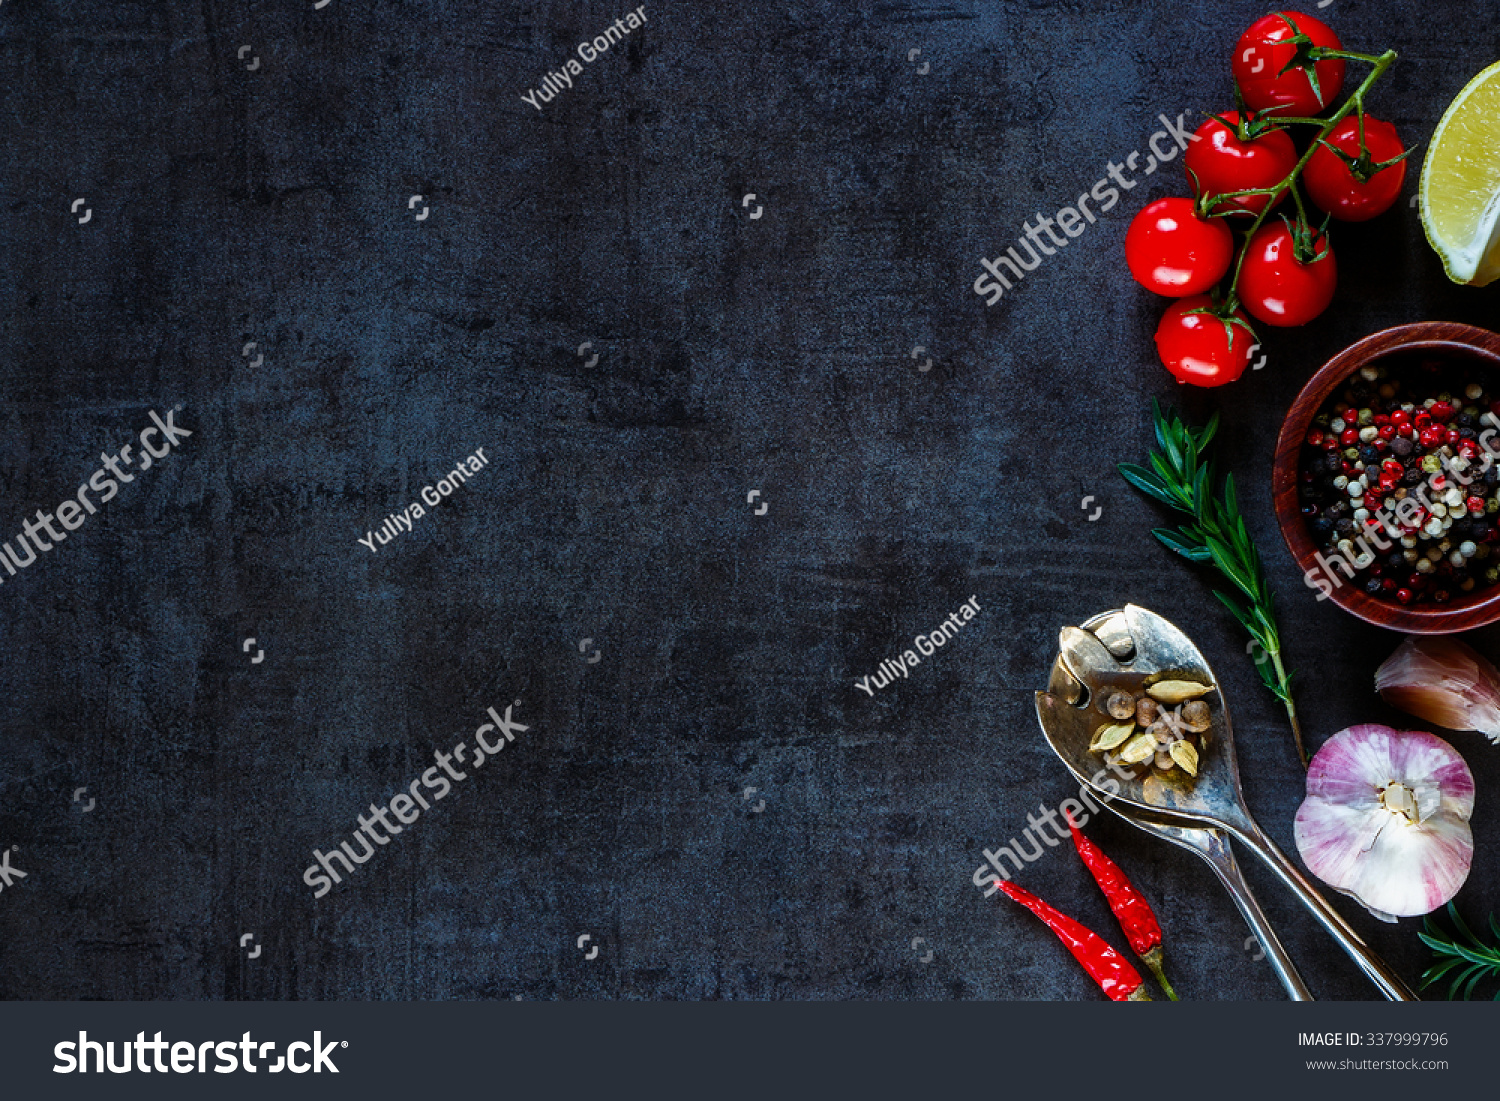 Vintage spoon and vegetables for cooking on dark metal background with space for text. Top view. Bio Healthy food ingredients.  #337999796